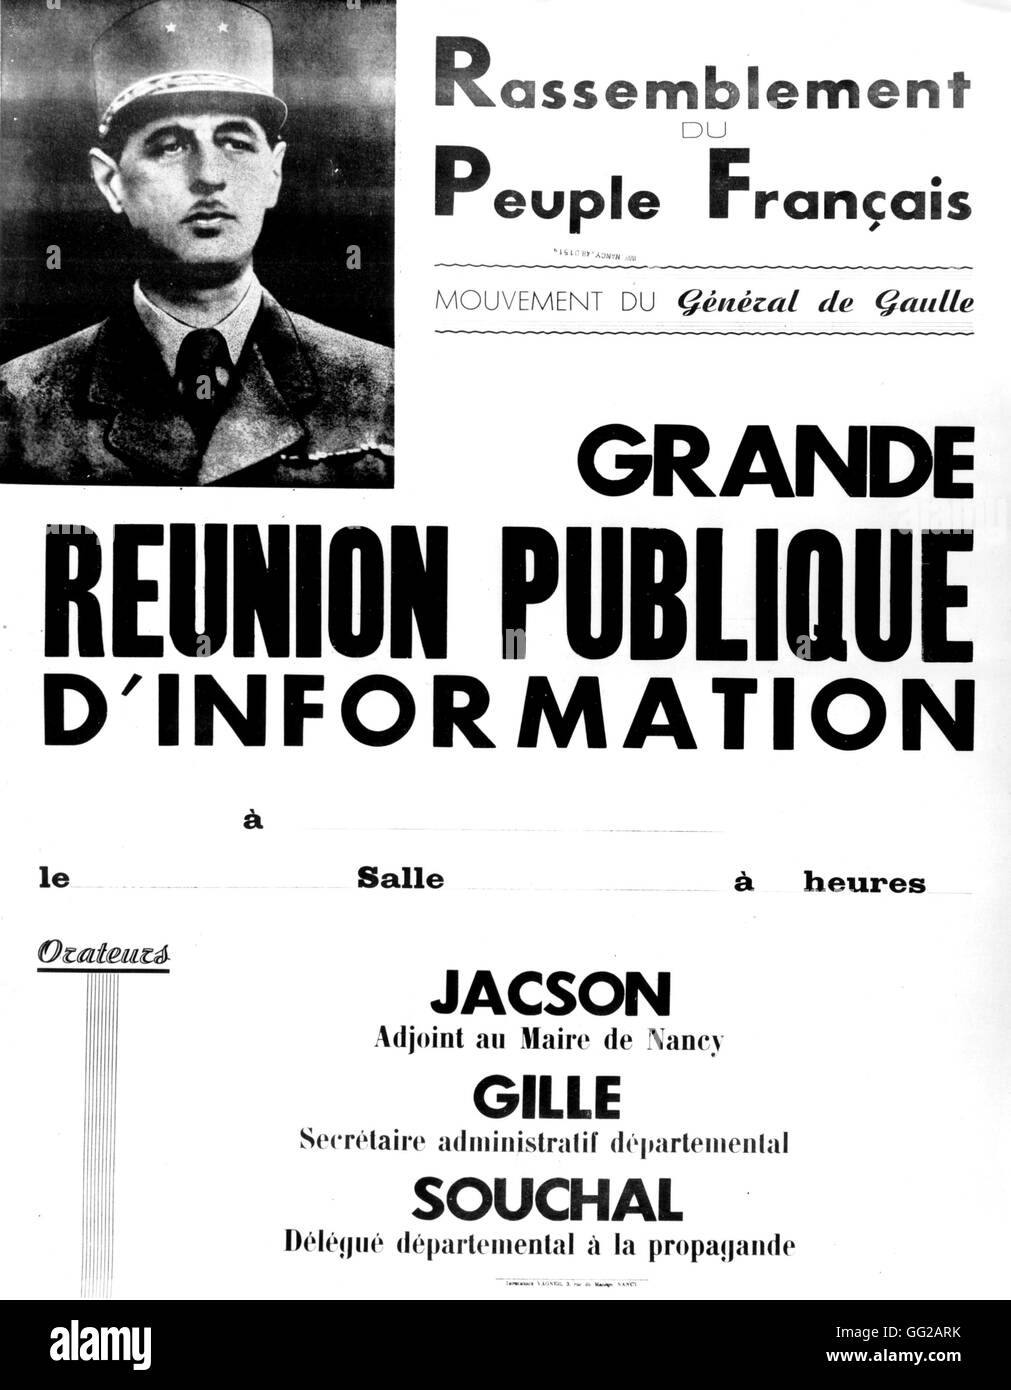 R.P.F. poster (De Gaulle's movement). Big public meeting for information 1947  France Stock Photo